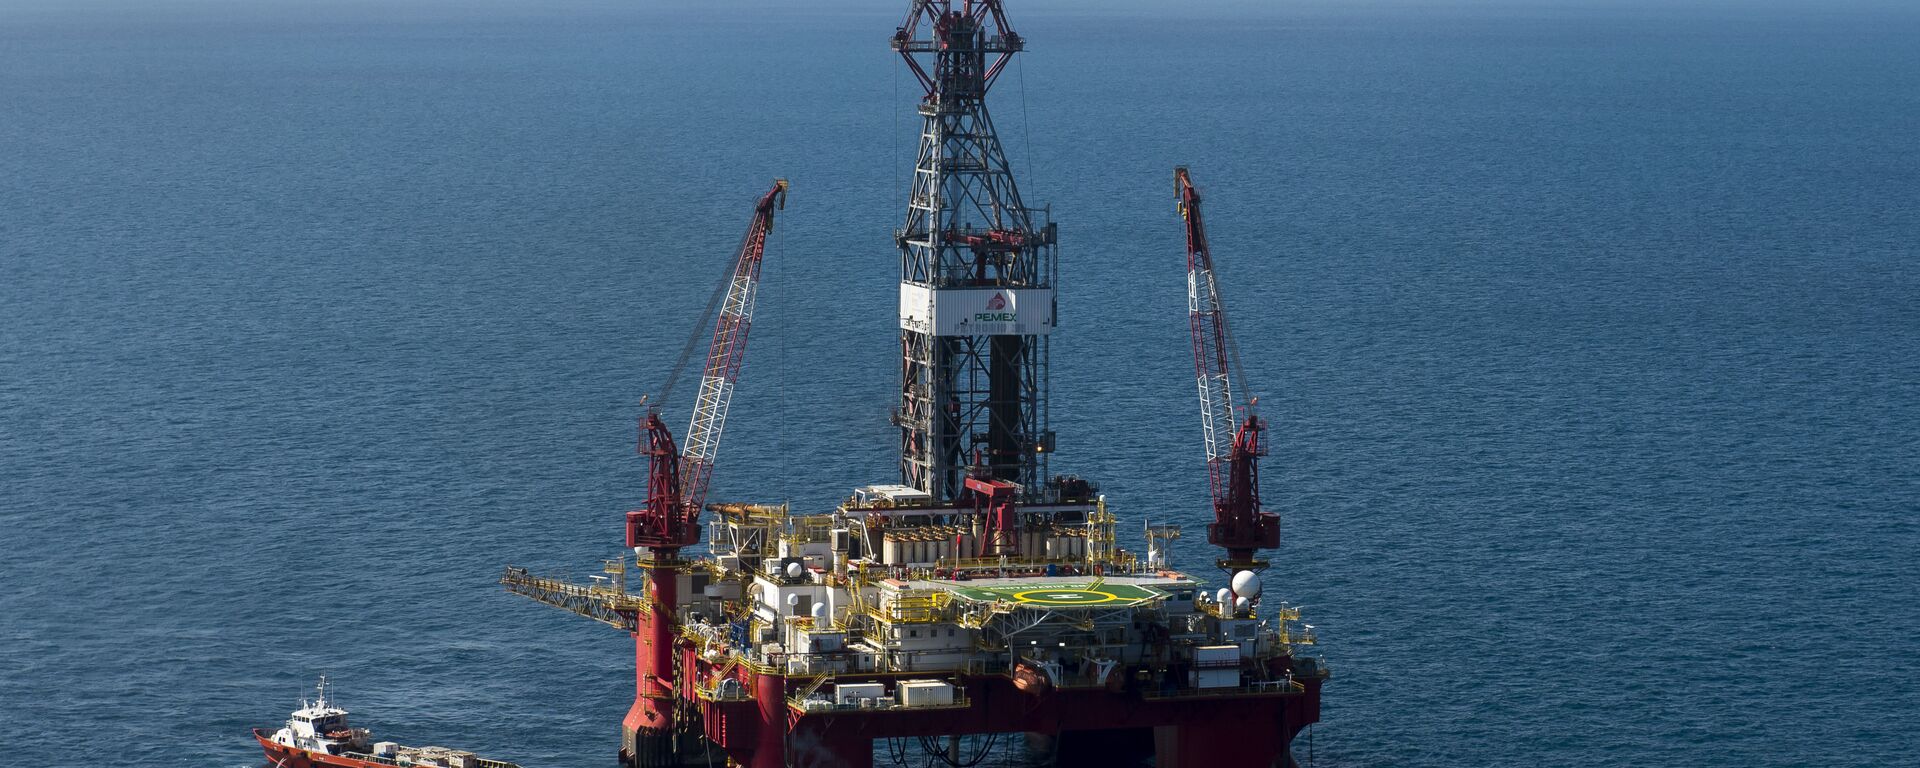 Aerial view of the Centenario exploration oil rig, operated by Mexican company Grupo R and working for Mexico's state-owned oil company PEMEX, in the Gulf of Mexico on August 30, 2013. - Sputnik Mundo, 1920, 21.04.2021